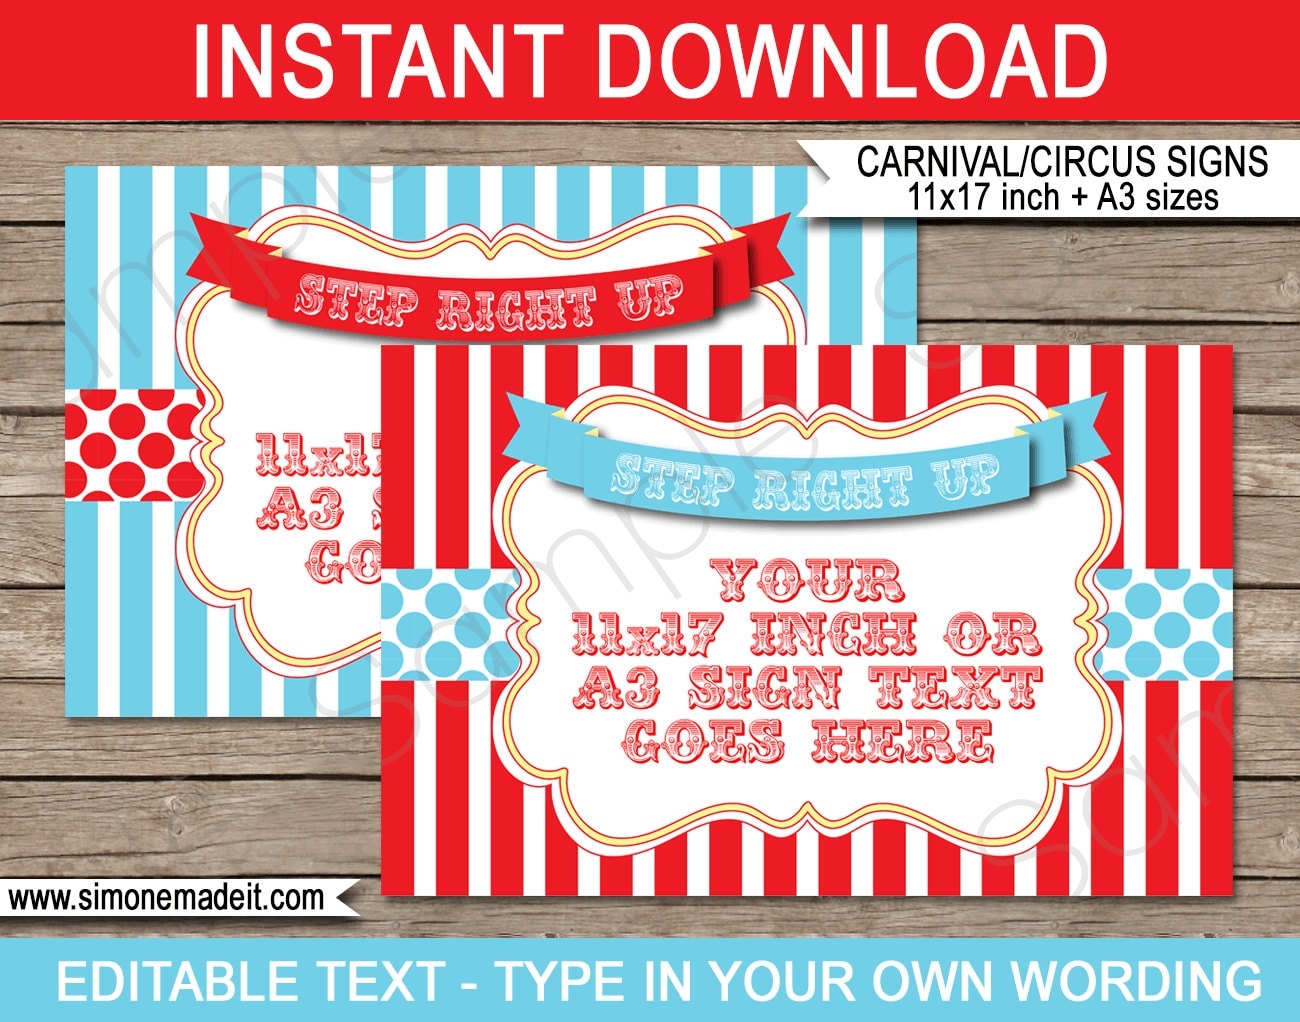 Circus Game Signs Template Printable Carnival Circus Theme Birthday Party INSTANT DOWNLOAD With EDITABLE Text 11x17 Inches A3 Sizes Etsy - Free Printable Carnival Signs